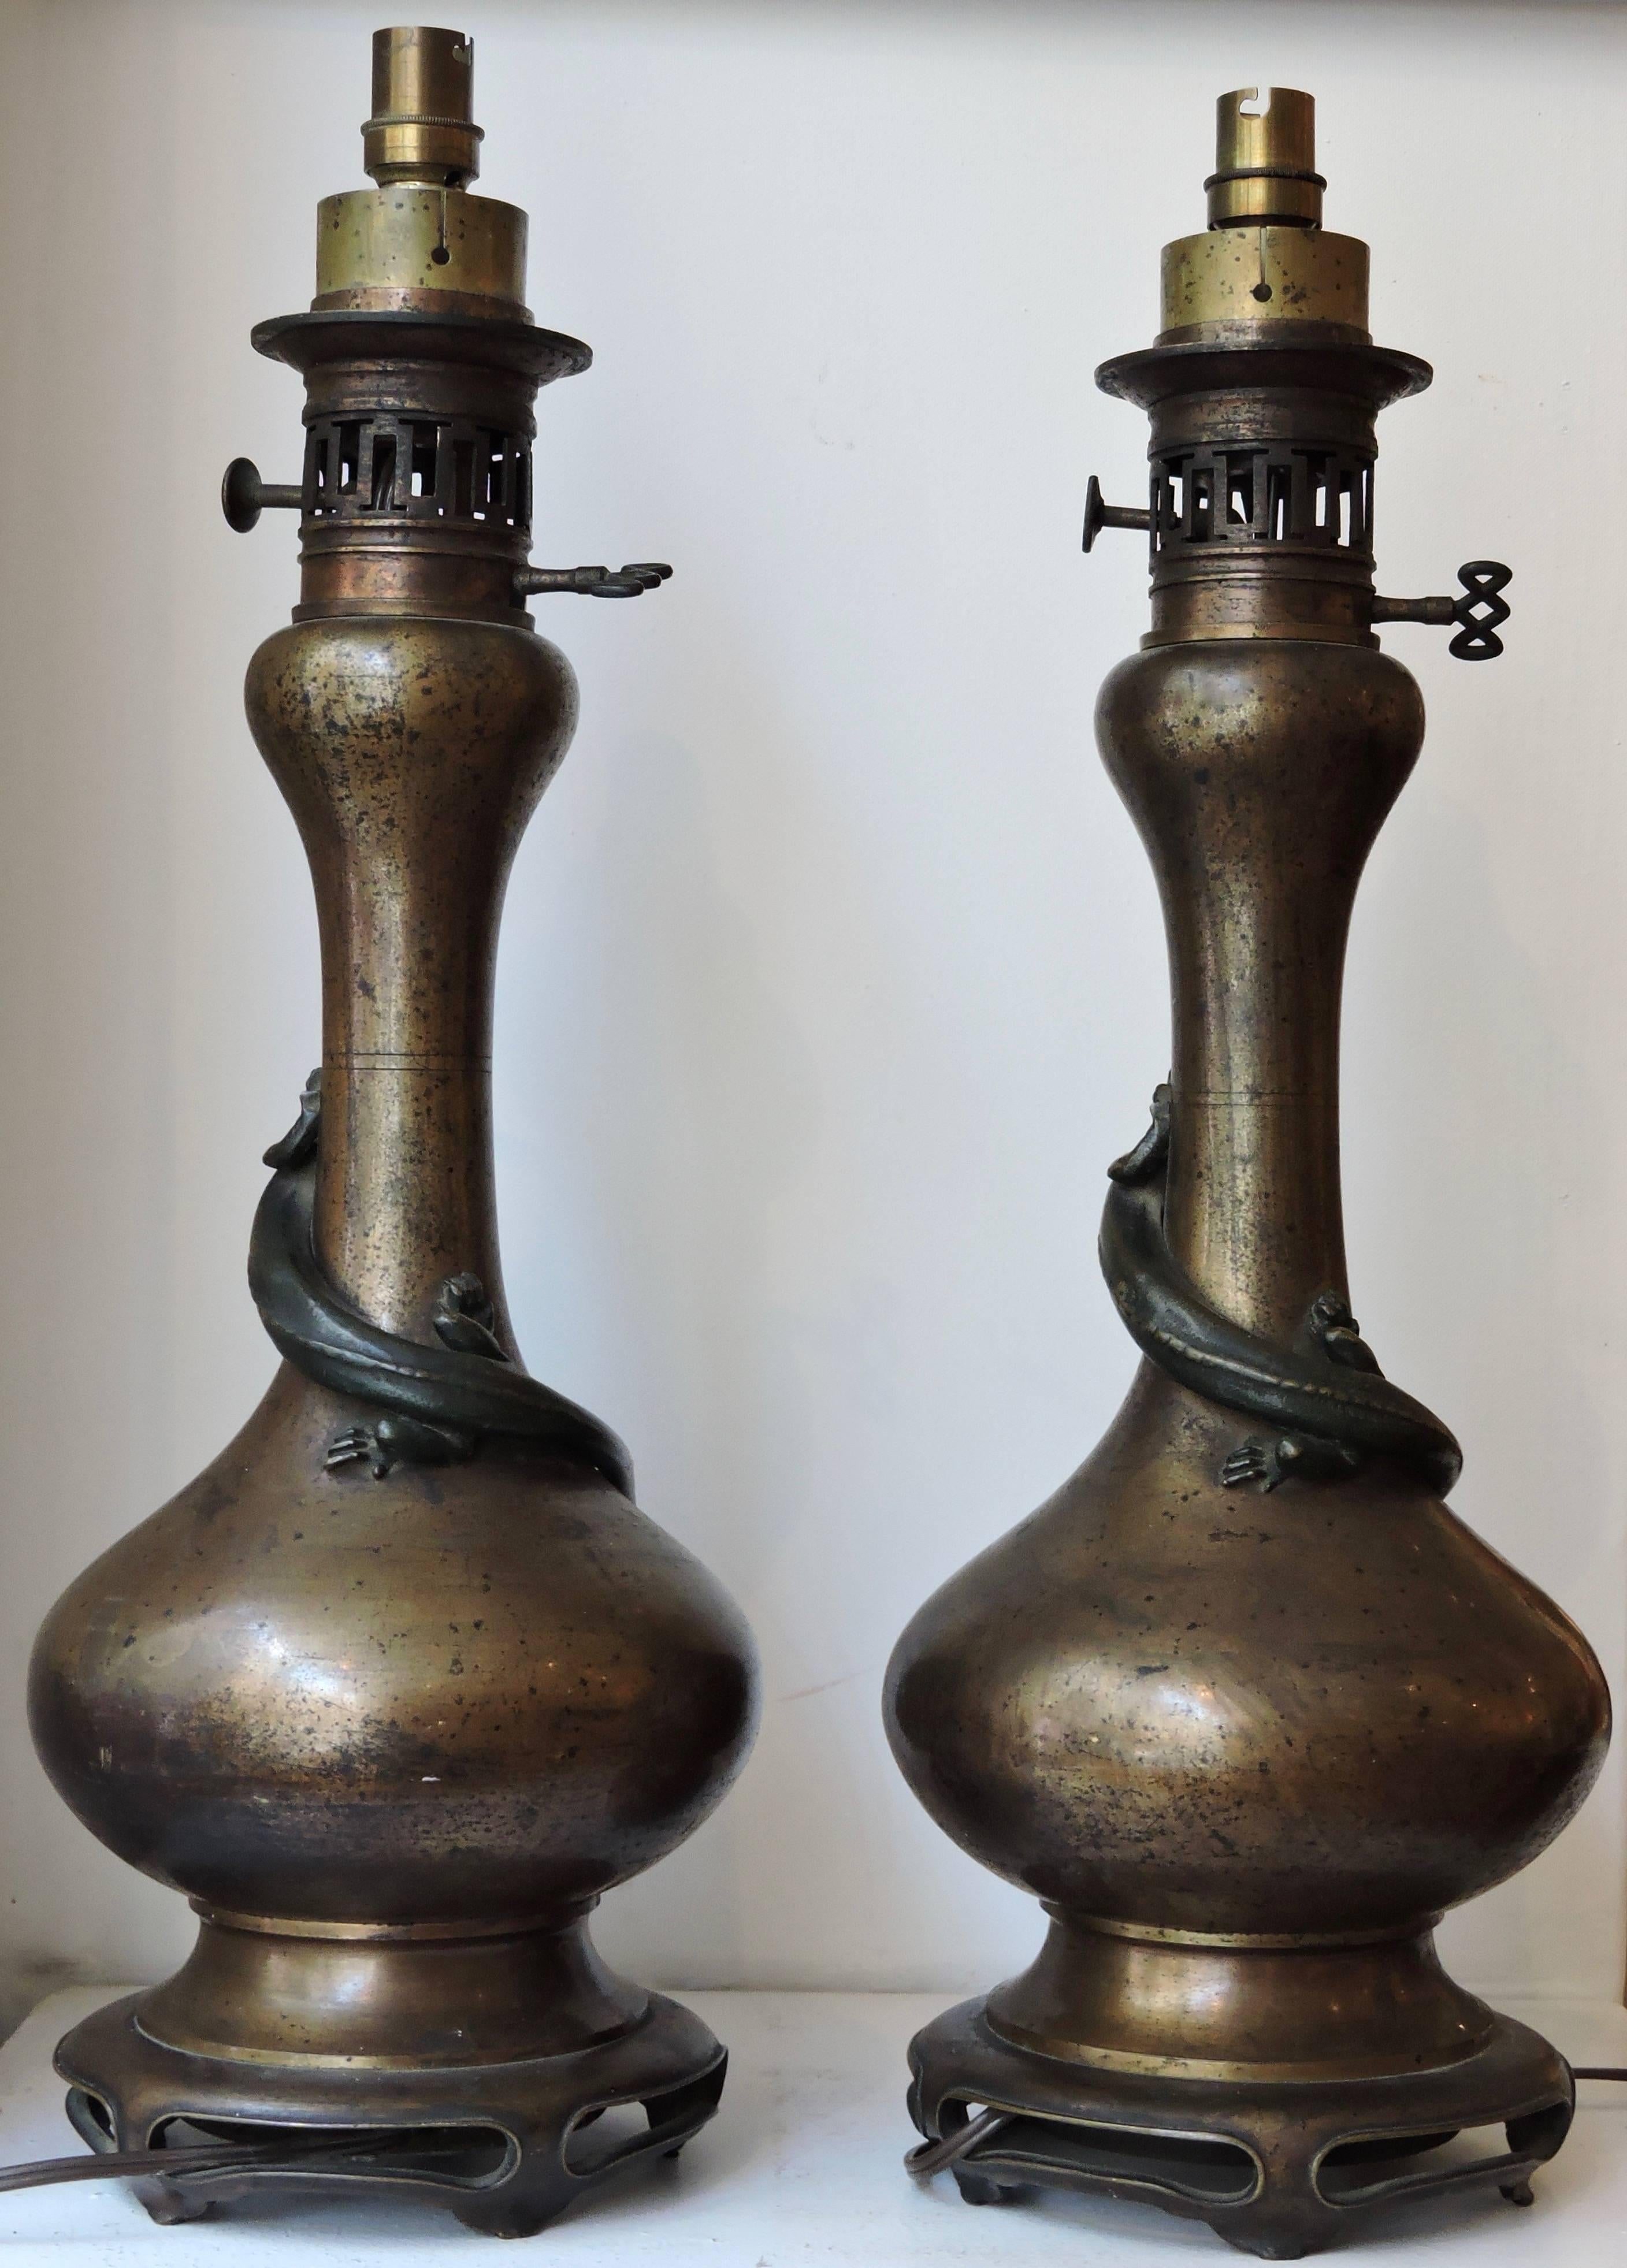 A pair of 19th century of golden brown two patinas bronze Japonisme lamps with lizards design in relief,
mounted for electricity.